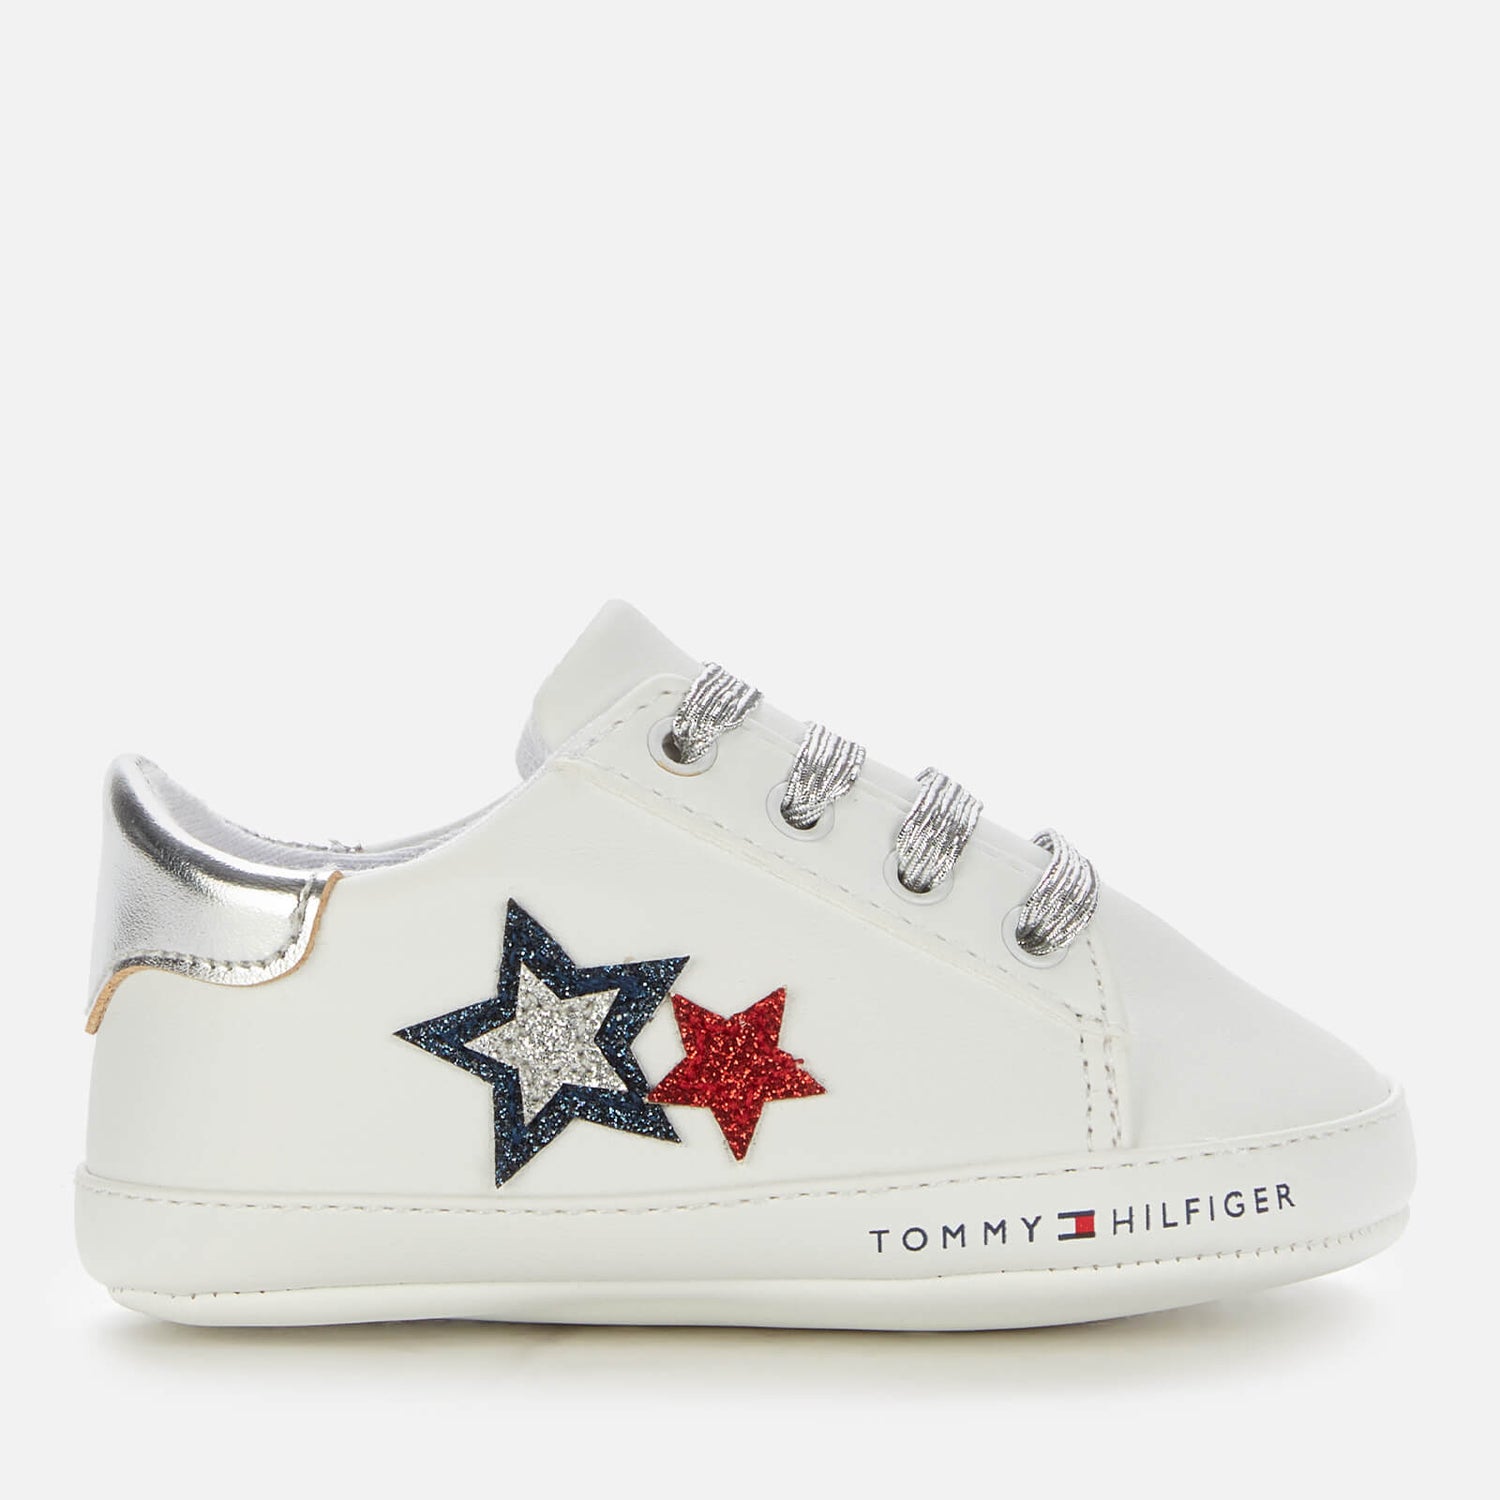 Tommy Hilfiger Girls' Lace-Up Shoe White/Blue/Red White/Blue/Red